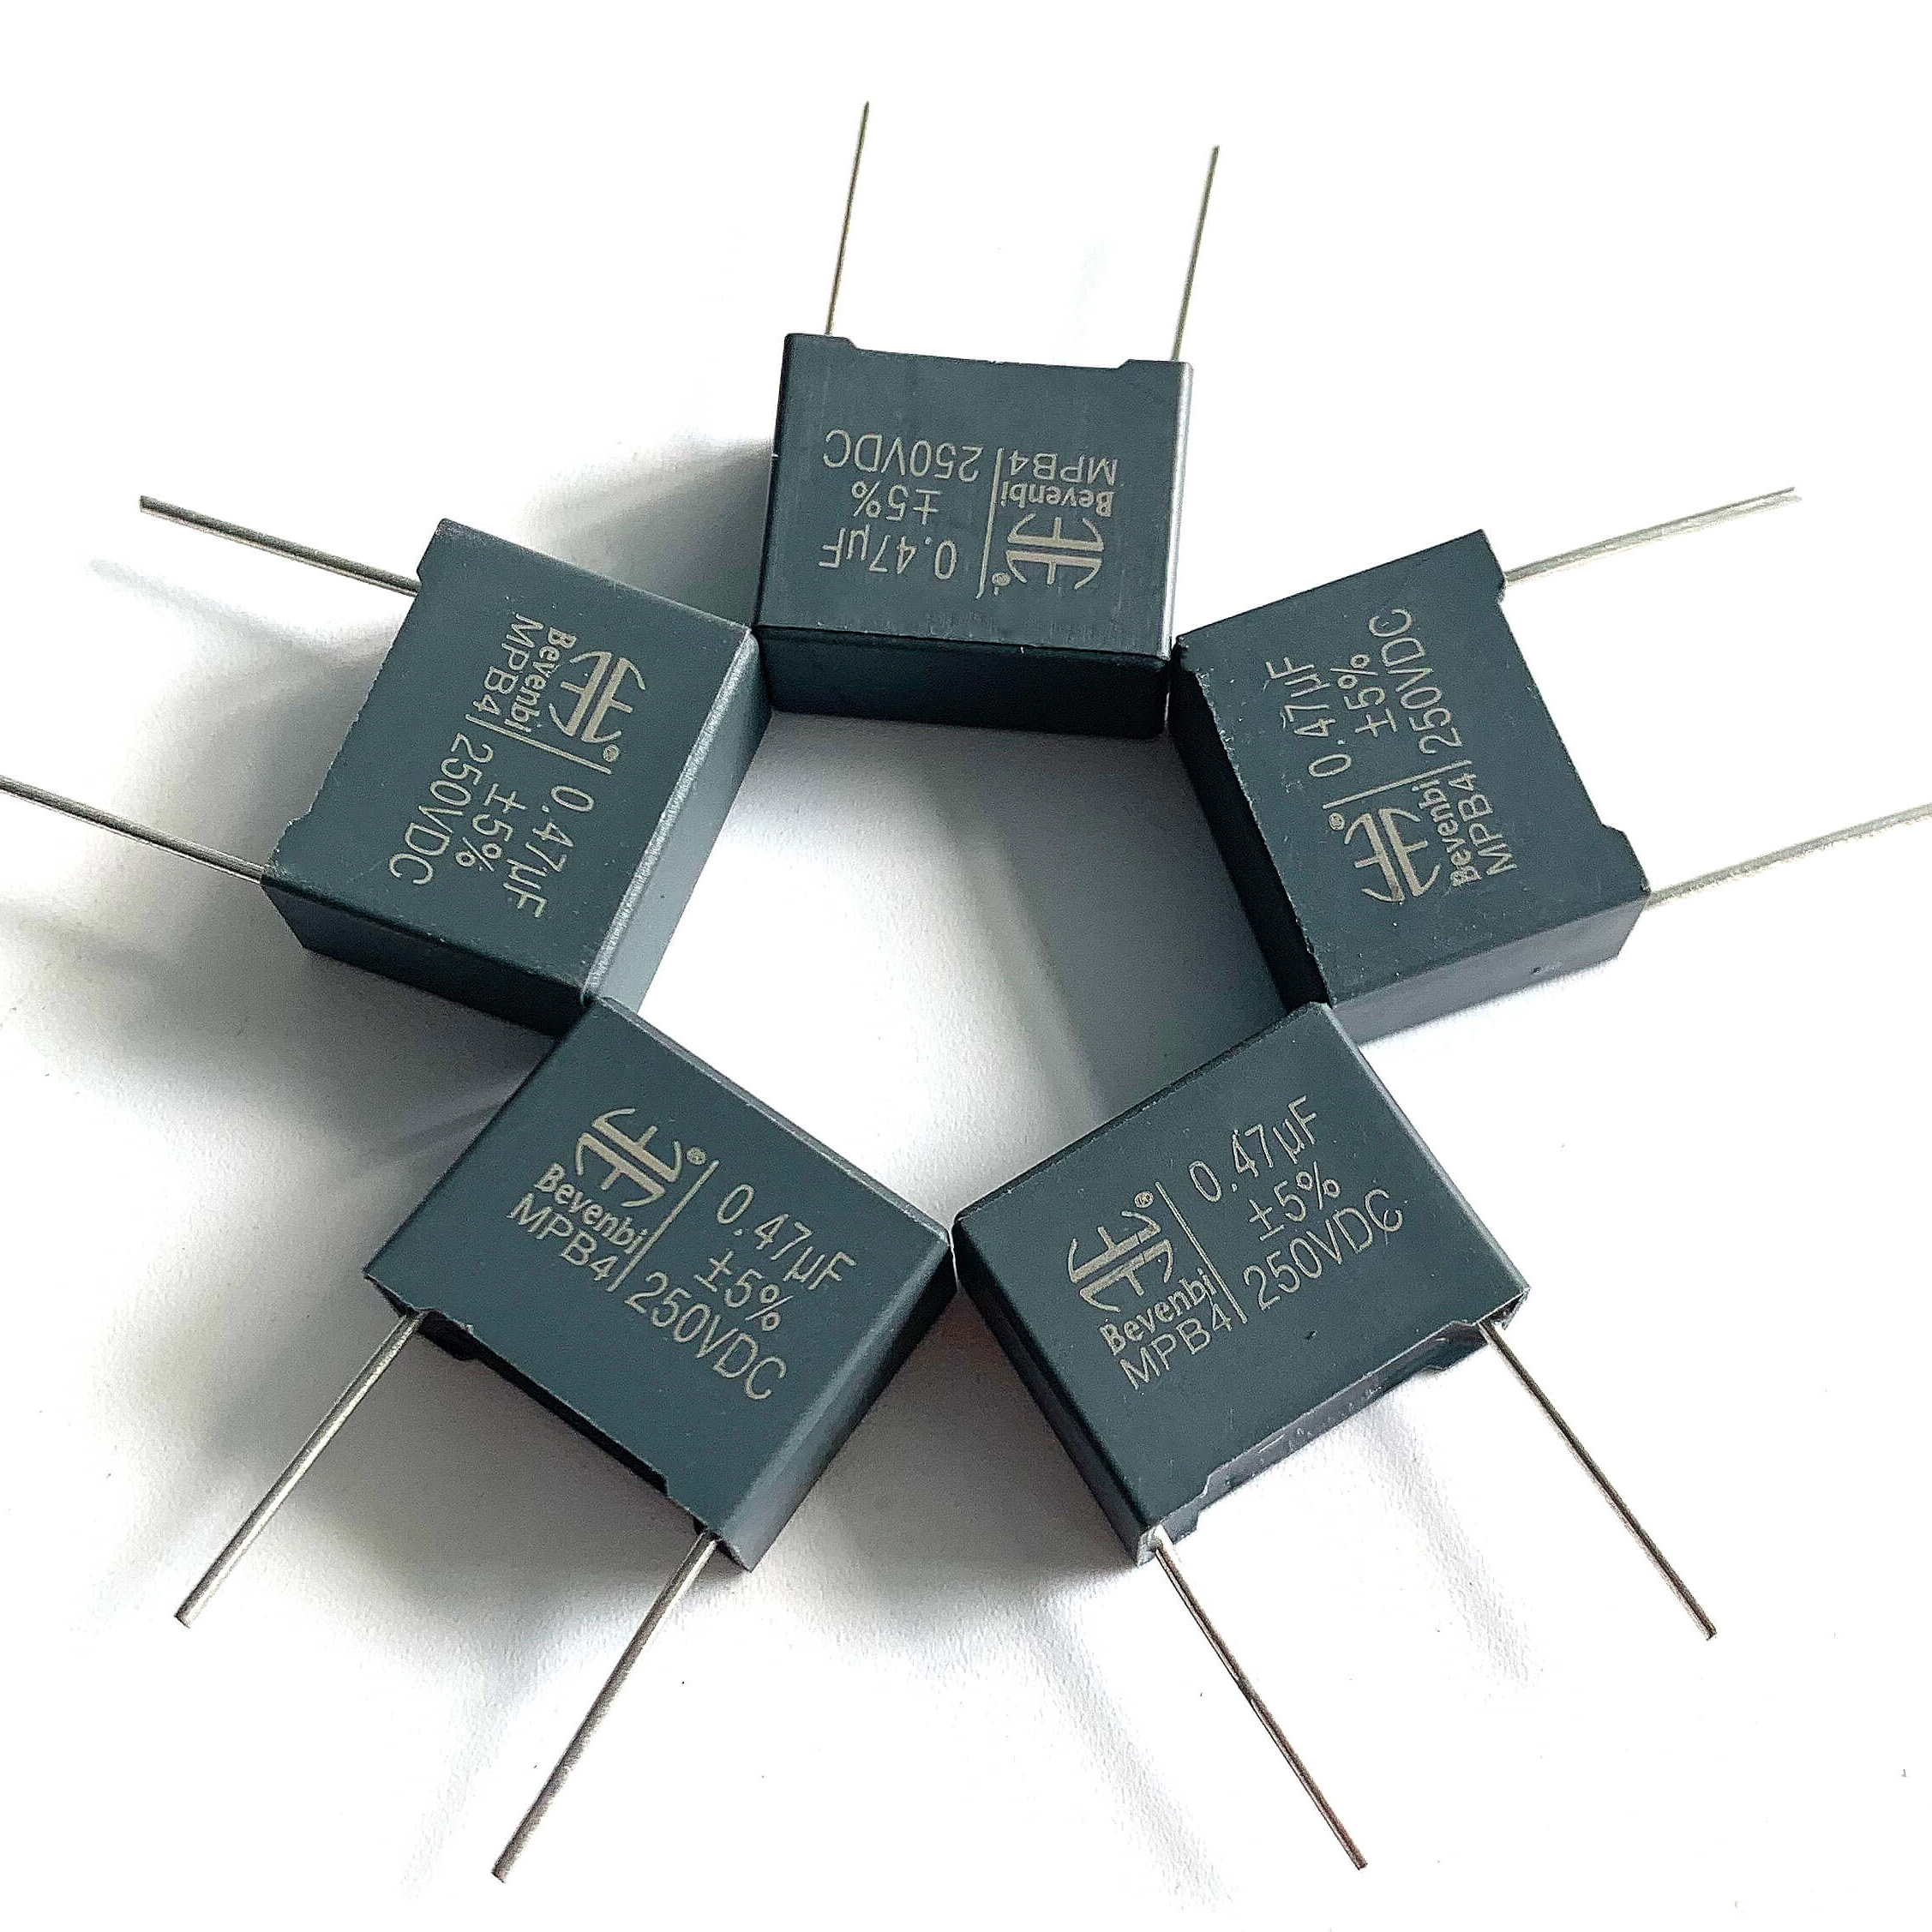 Chinese Professional 100v Metallized Polyester Film Capacitor -
 CL23(MEB) Box Metallized Polyester Film Capacitors – A Friend